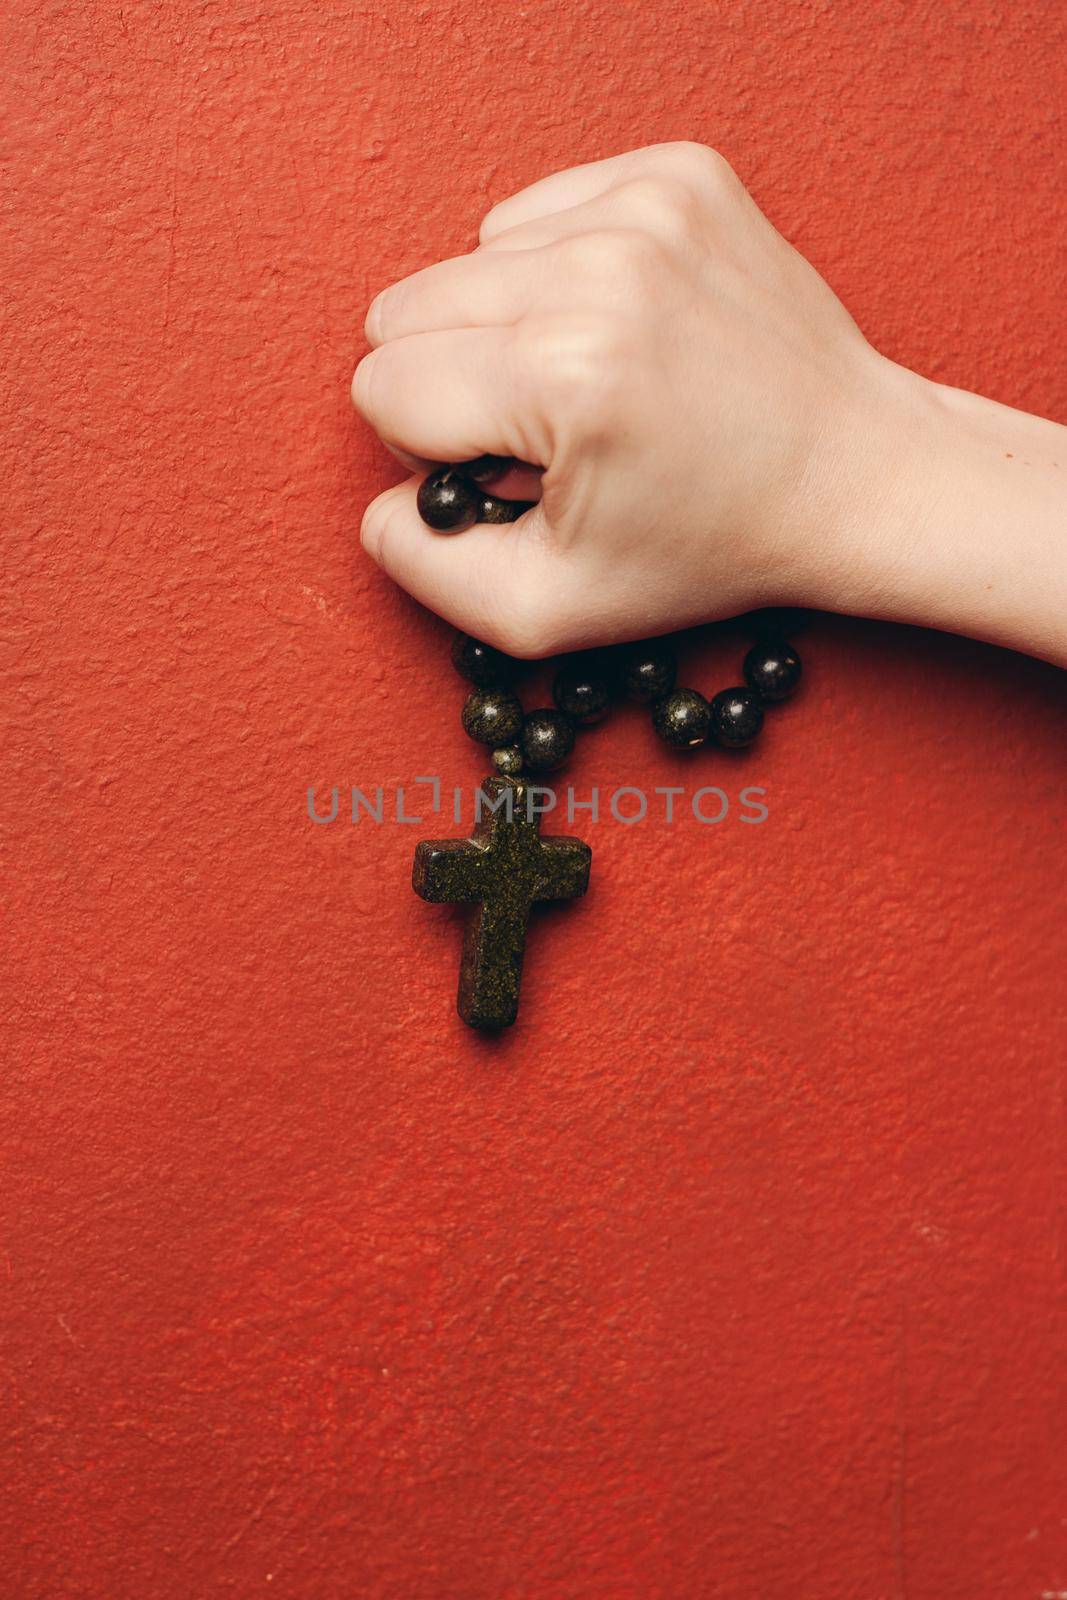 rosary beads with a cross catholicism christianity by Vichizh